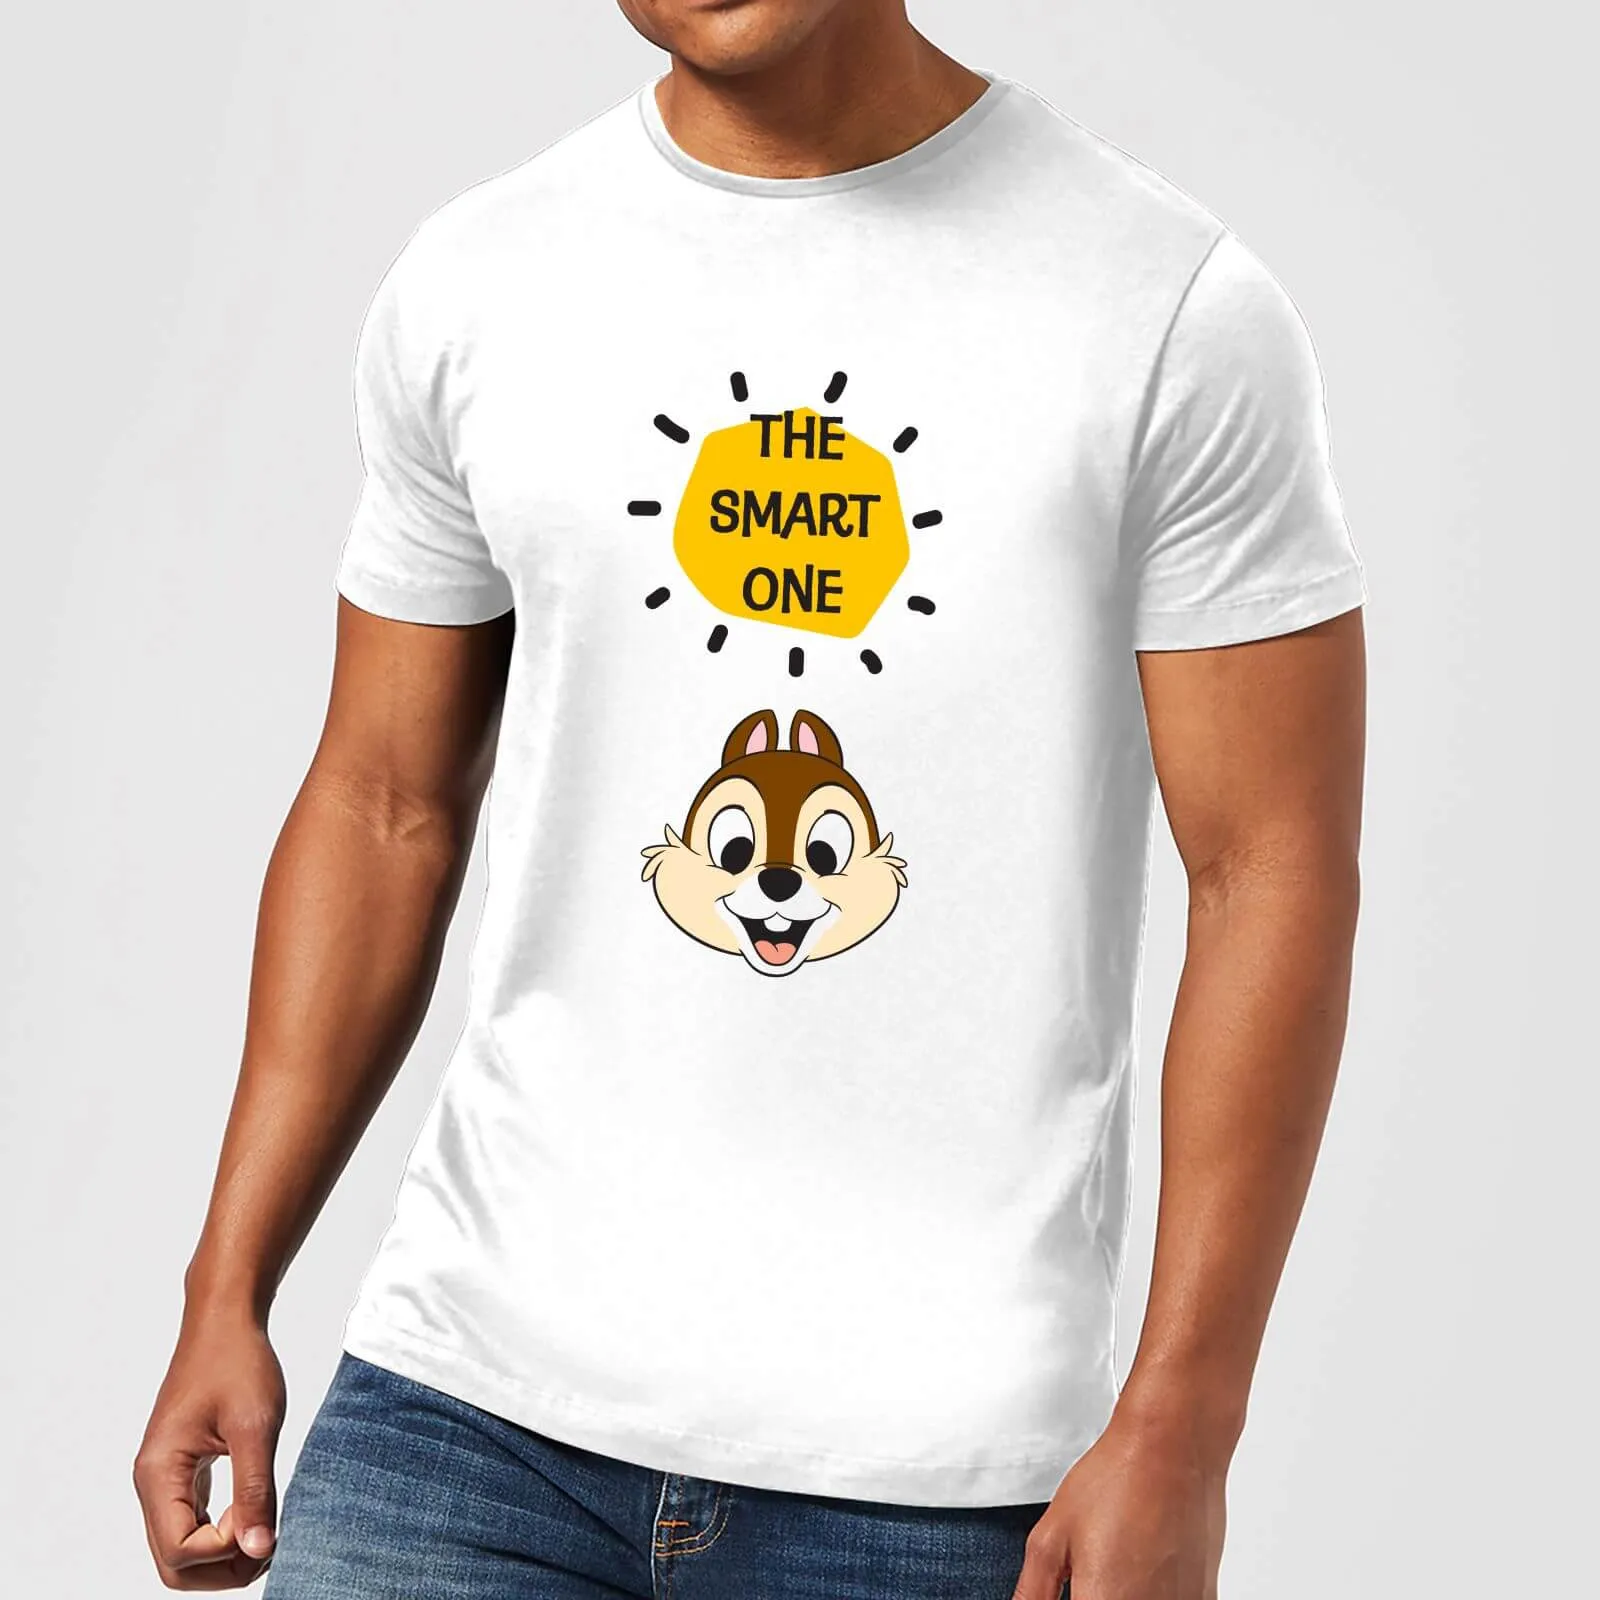  Chip 'N' Dale The Smart One Men's T-Shirt - White - S